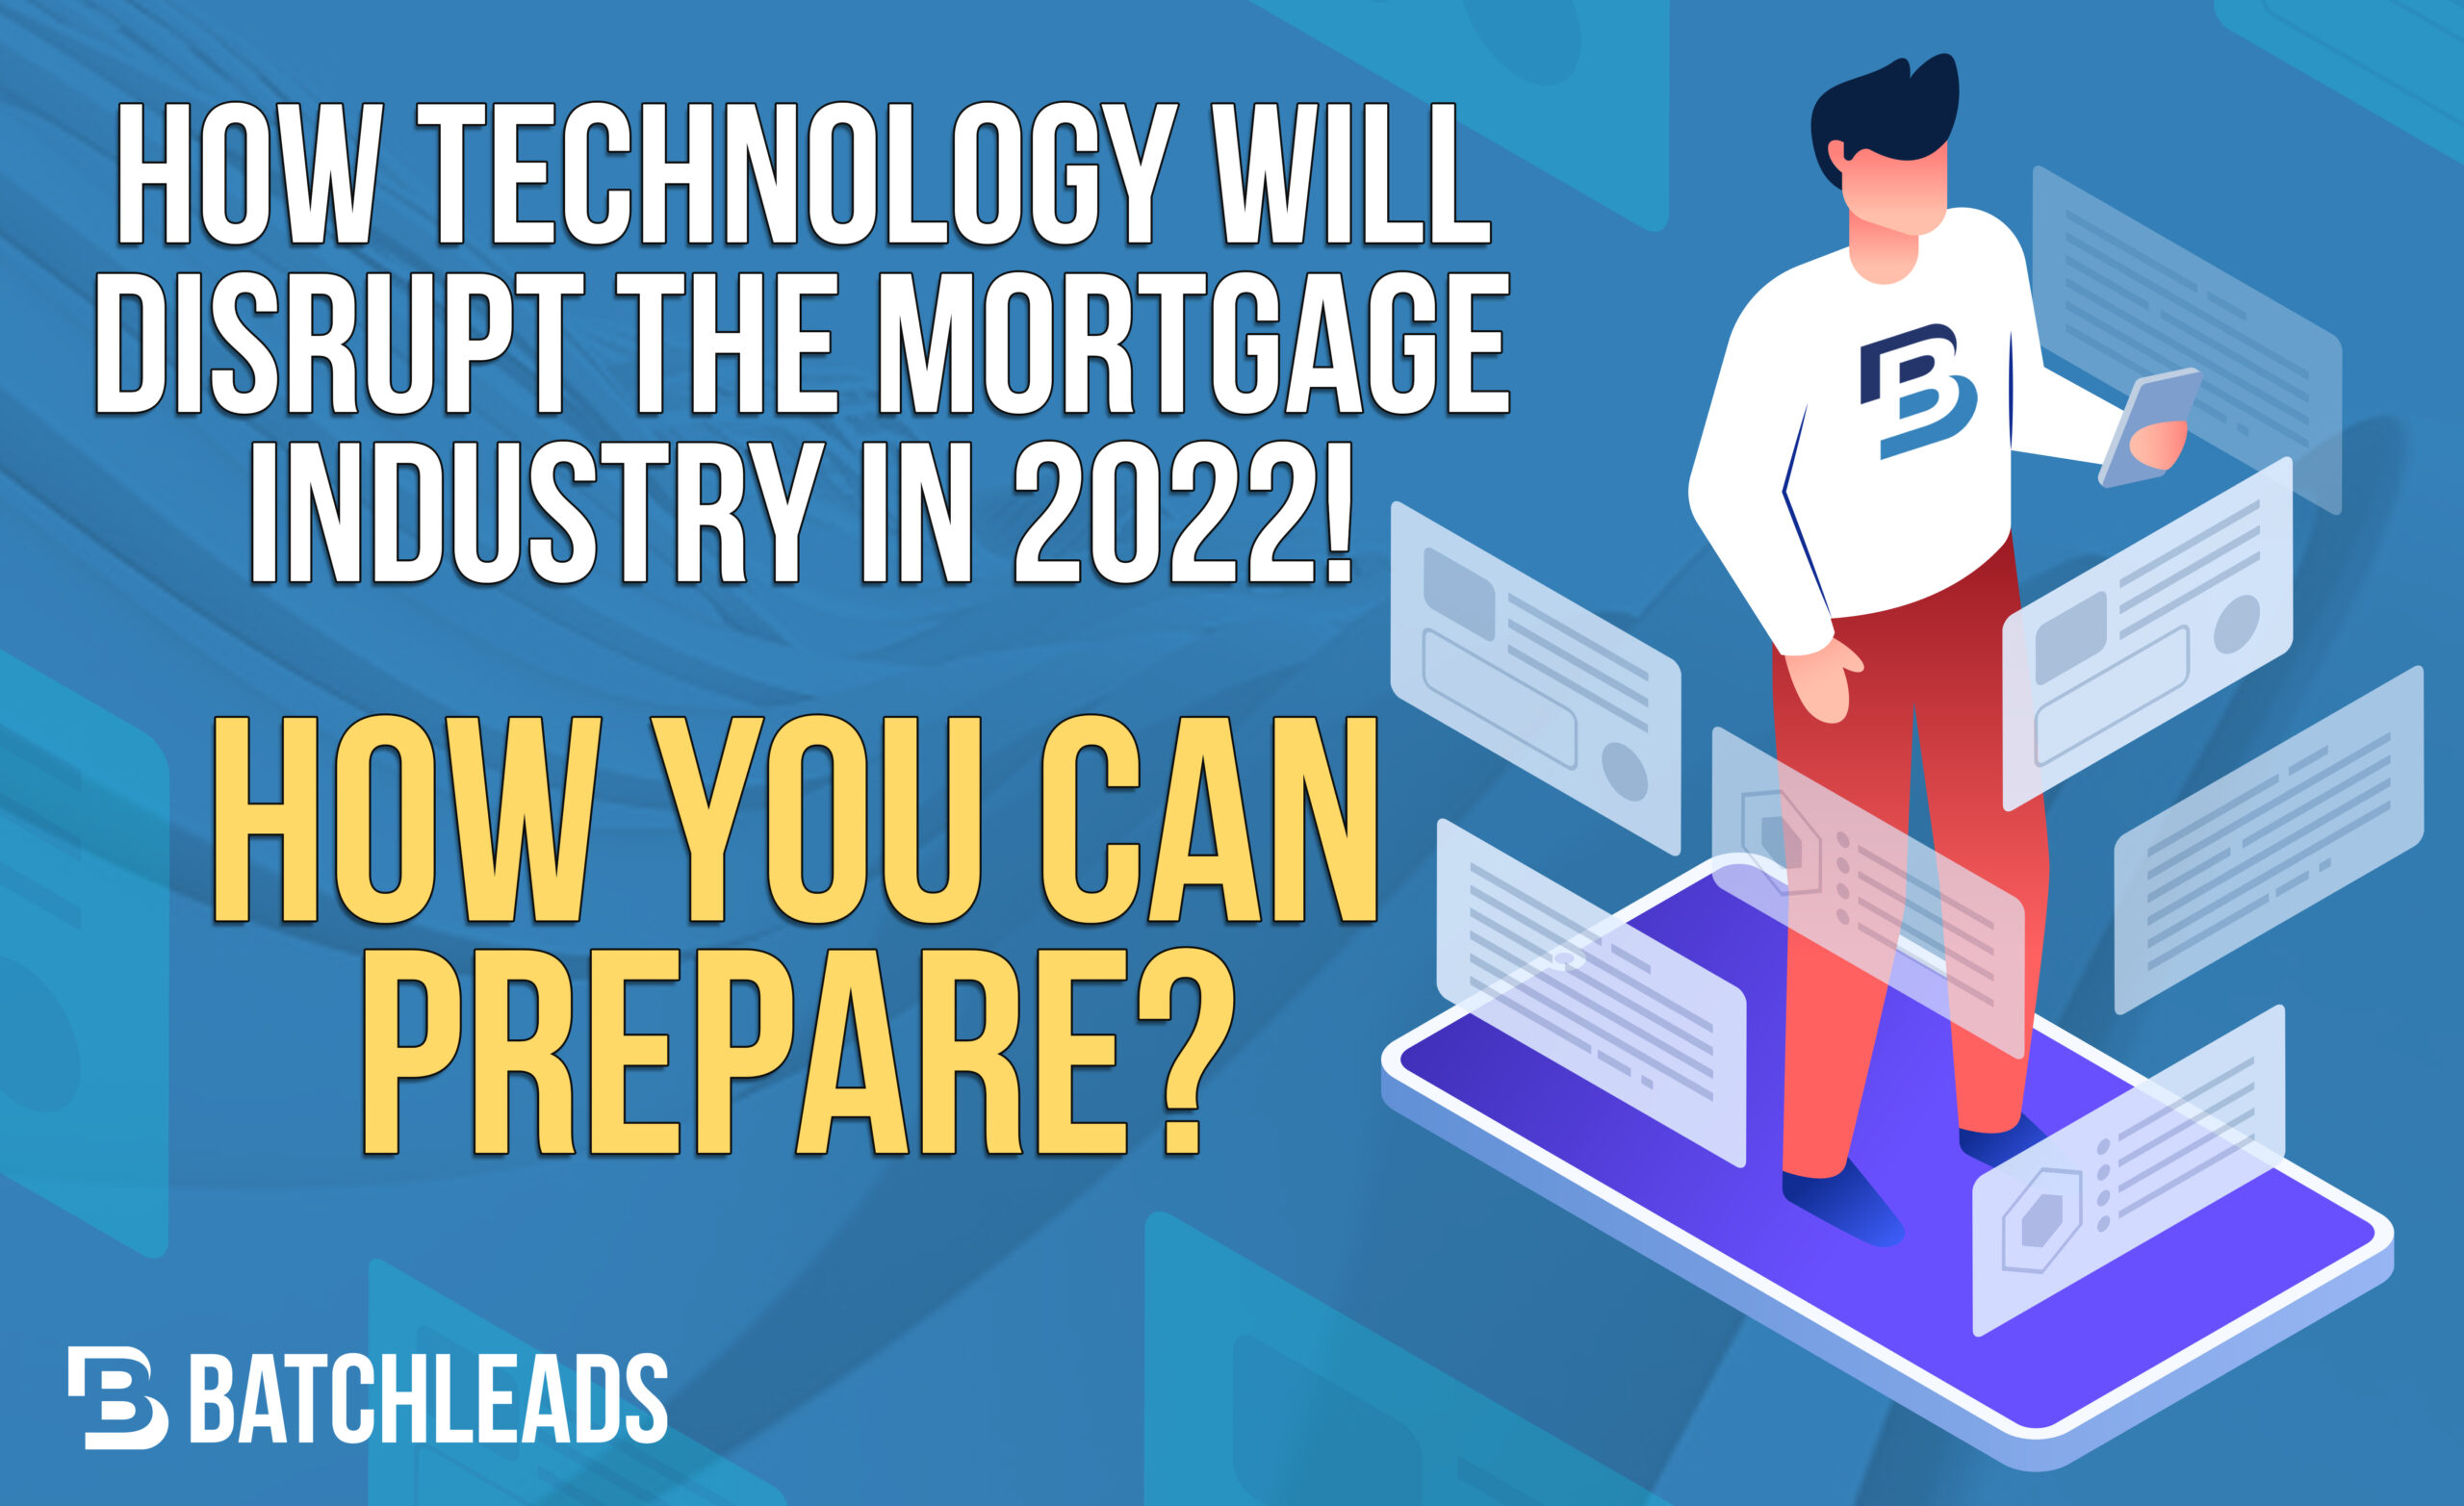 How Technology Will Disrupt The Mortgage Industry In 2022 & How You Can Prepare